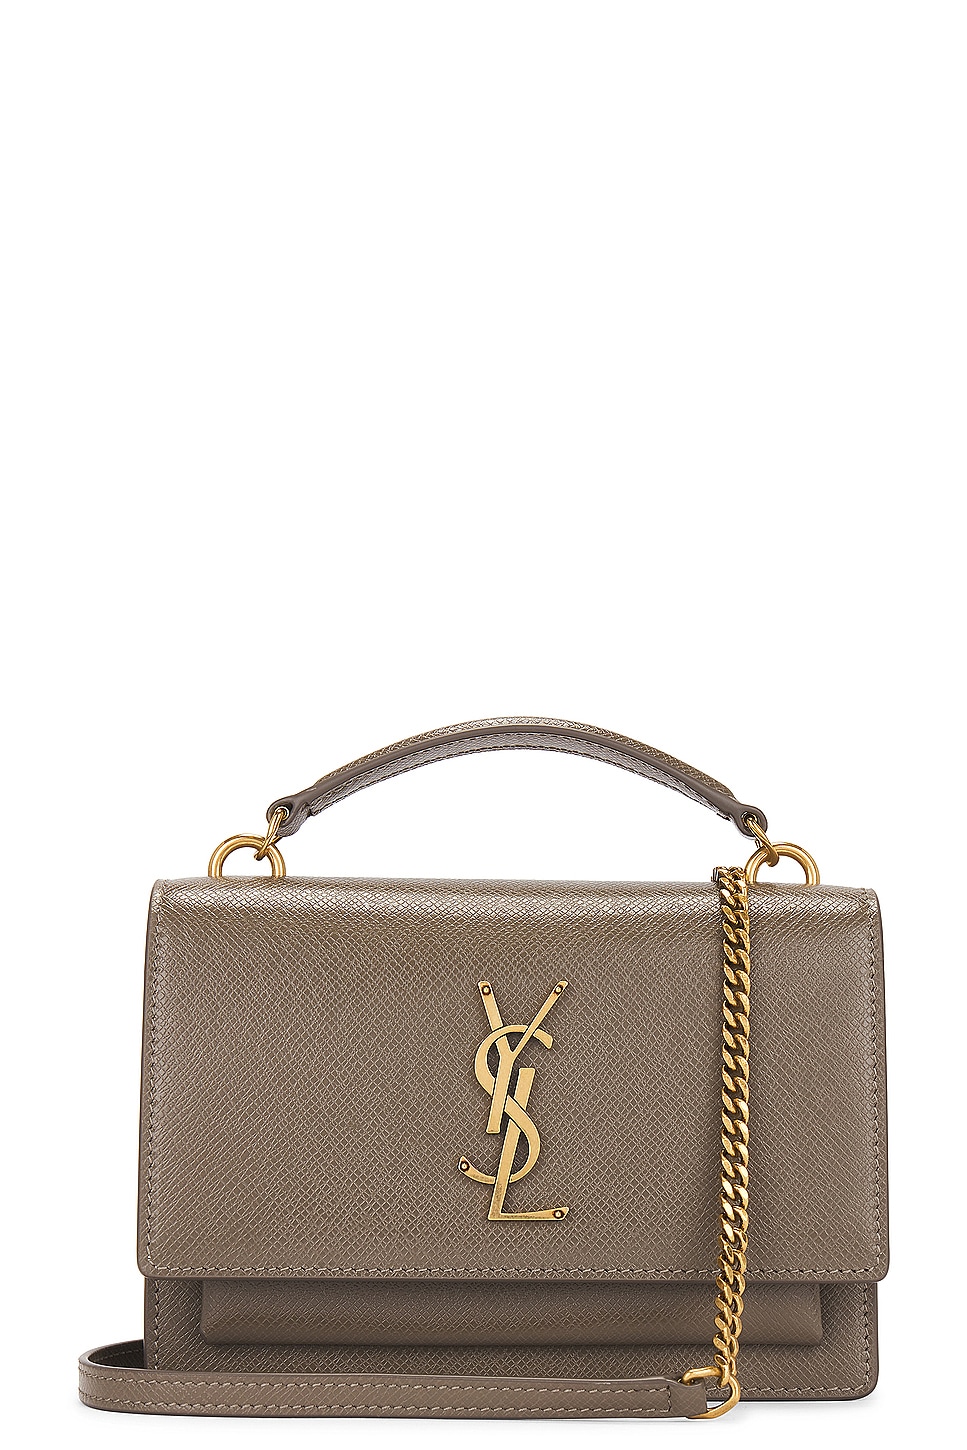 Top Handle Sunset Chain Wallet Bag in Taupe